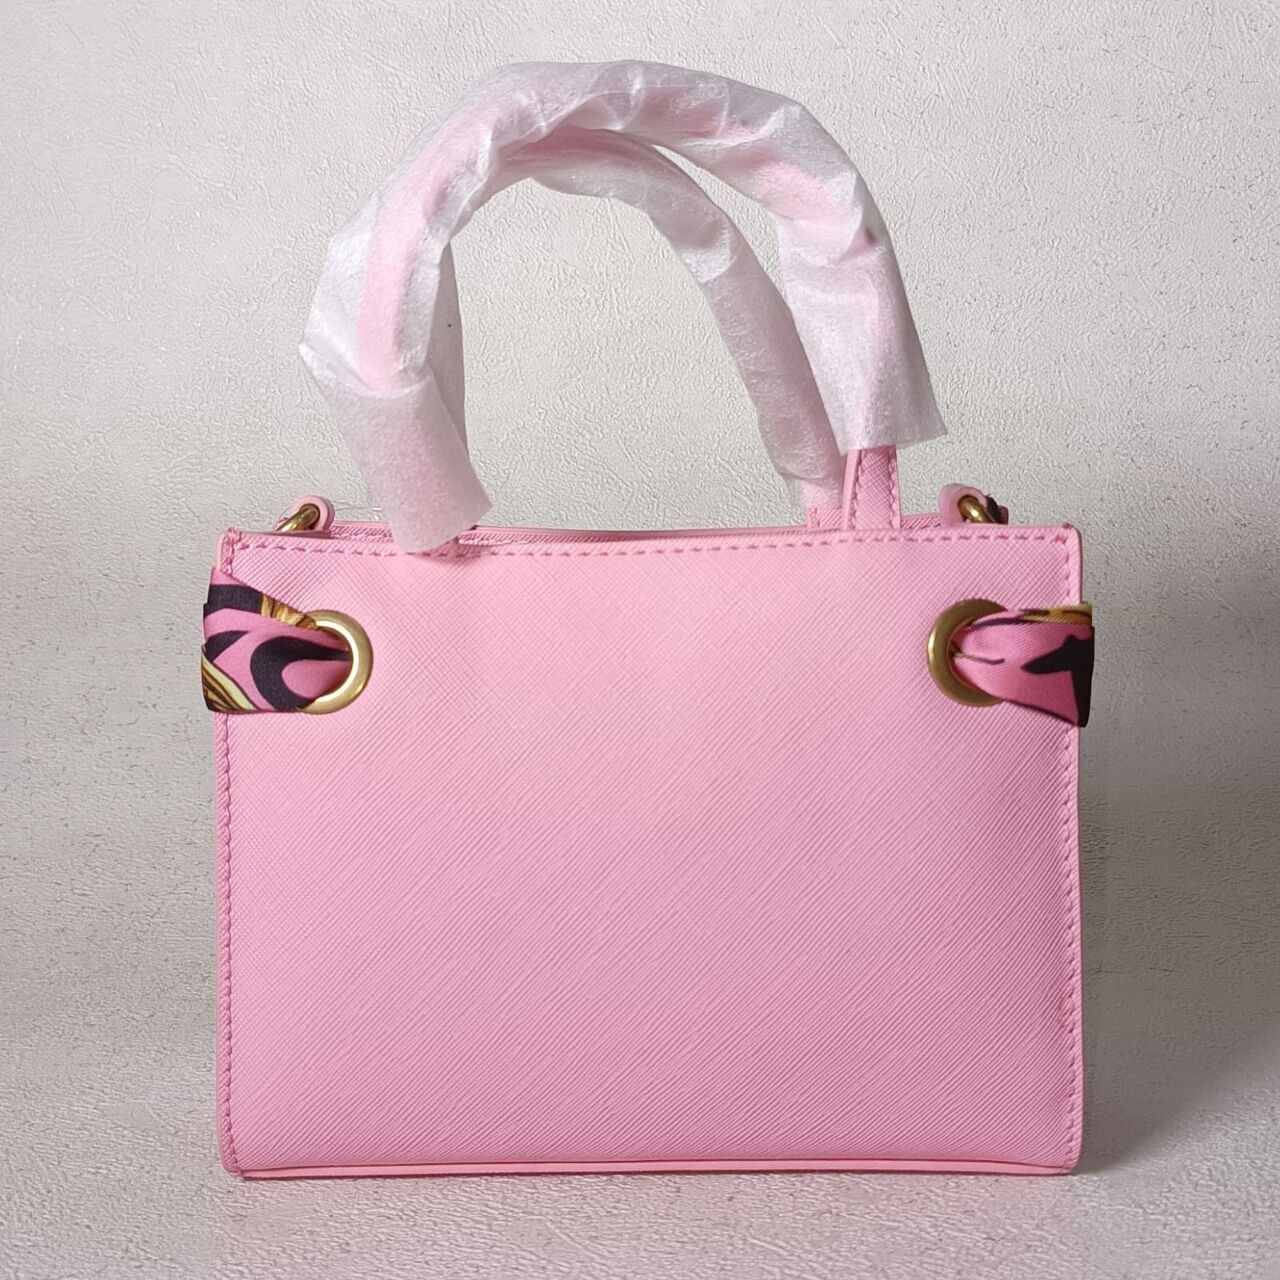 Versace Jeans Couture Pink Tote Bag